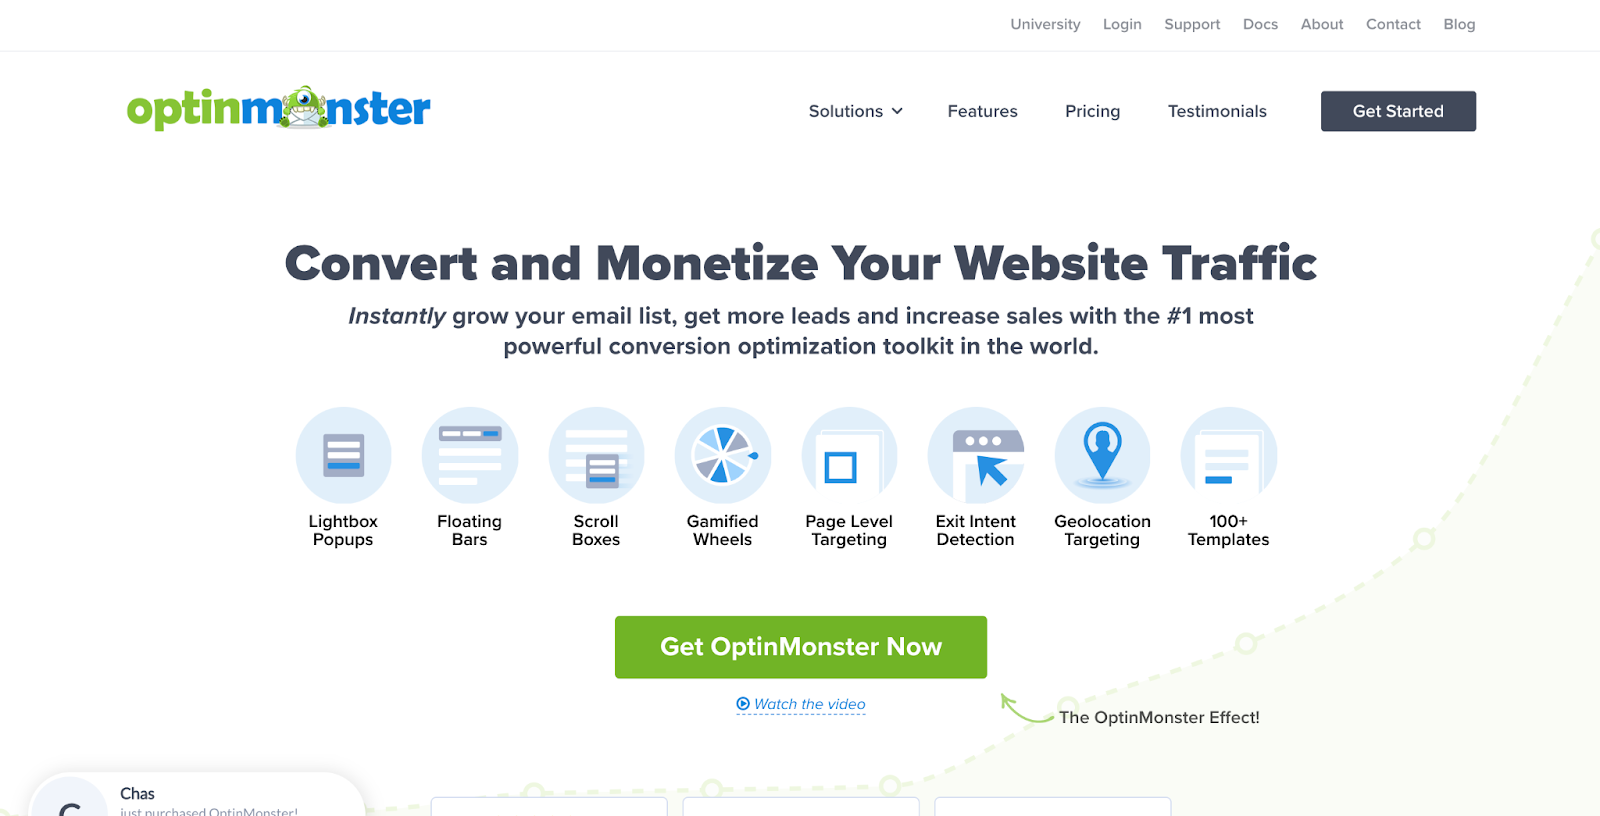 OptinMonster – Plugins for Health Coaches